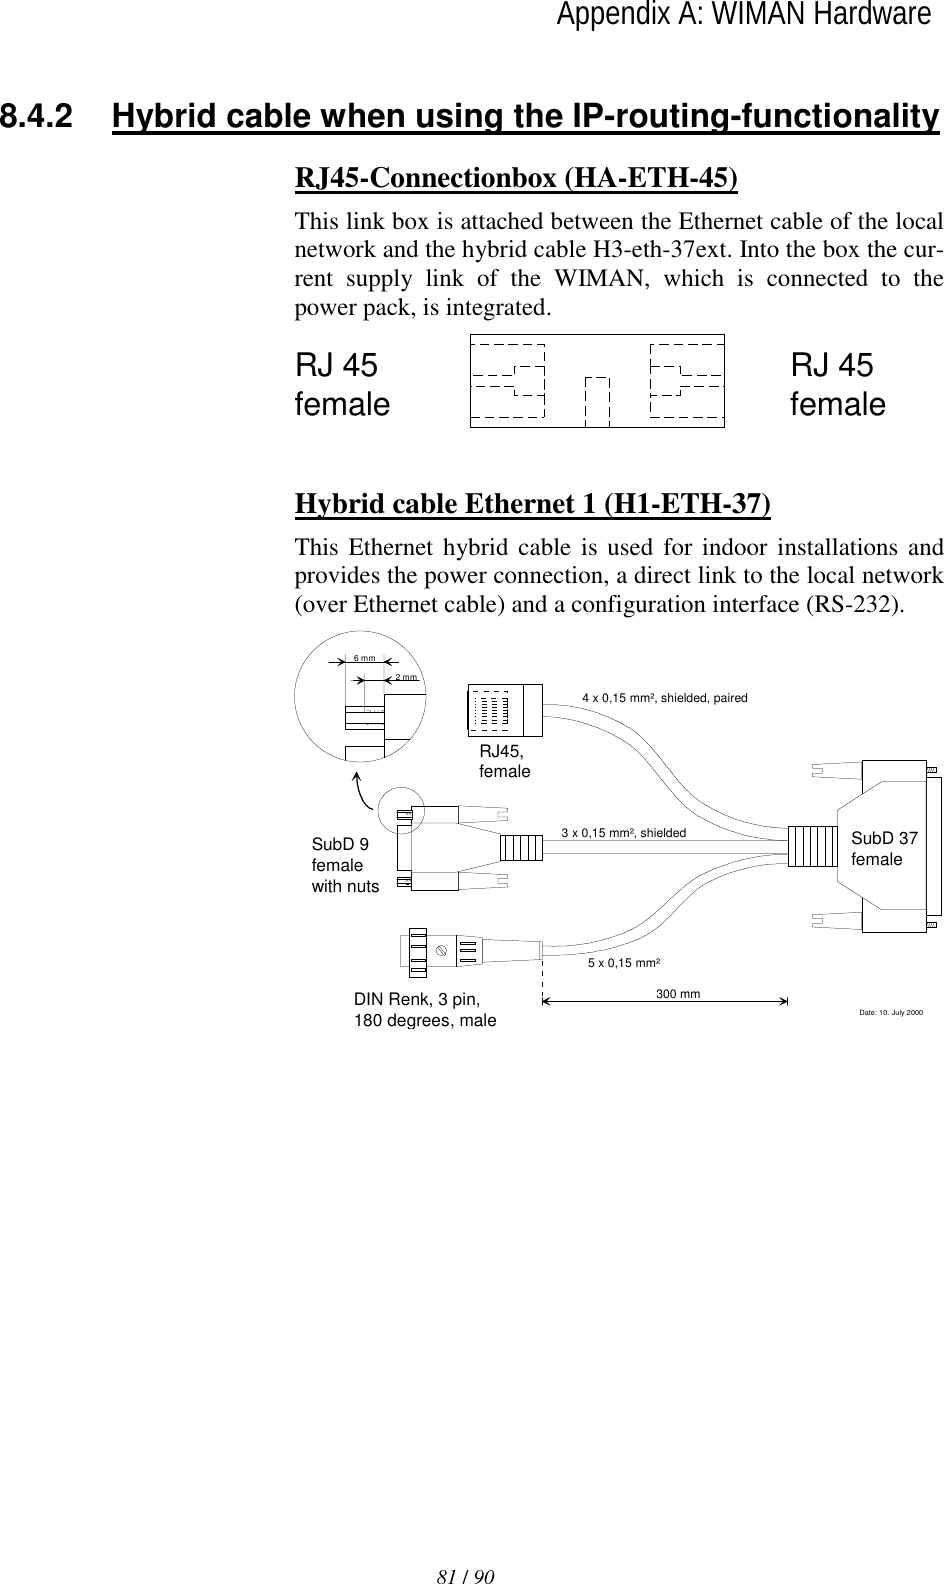   81 / 90lAppendix A: WIMAN Hardware   8.4.2  Hybrid cable when using the IP-routing-functionality RJ45-Connectionbox (HA-ETH-45) This link box is attached between the Ethernet cable of the local network and the hybrid cable H3-eth-37ext. Into the box the cur-rent supply link of the WIMAN, which is connected to the power pack, is integrated. RJ 45female RJ 45female  Hybrid cable Ethernet 1 (H1-ETH-37) This Ethernet hybrid cable is used for indoor installations and provides the power connection, a direct link to the local network (over Ethernet cable) and a configuration interface (RS-232). SubD 37female4 x 0,15 mm², shielded, paired3 x 0,15 mm², shielded5 x 0,15 mm²300 mmDIN Renk, 3 pin,180 degrees, male Date: 10. July 2000SubD 9femalewith nutsRJ45,female2 mm6 mm 